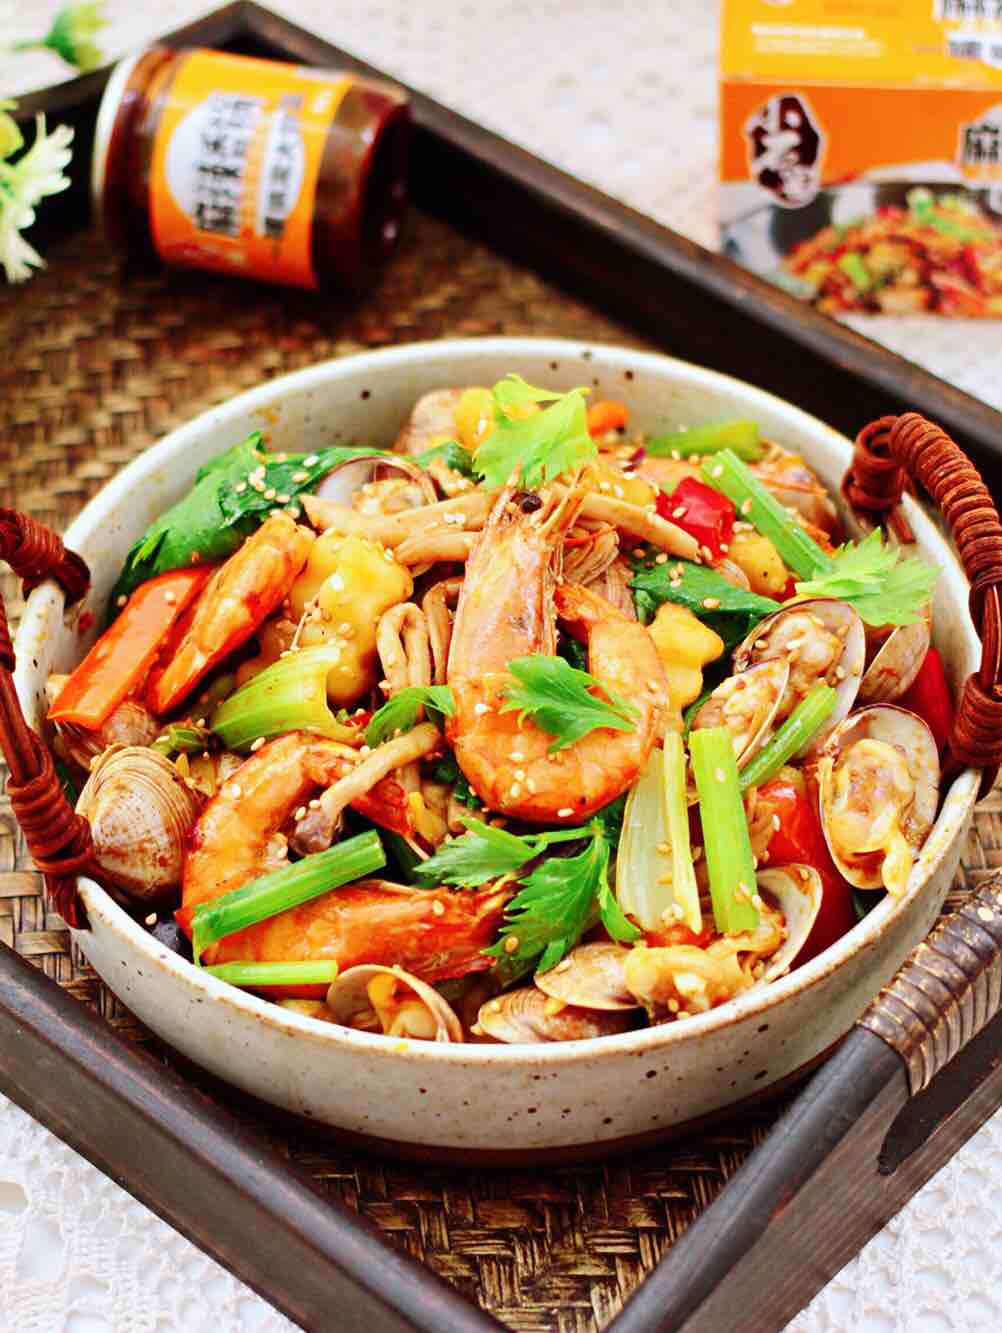 Spicy Hot Pot with Seafood and Mixed Vegetables